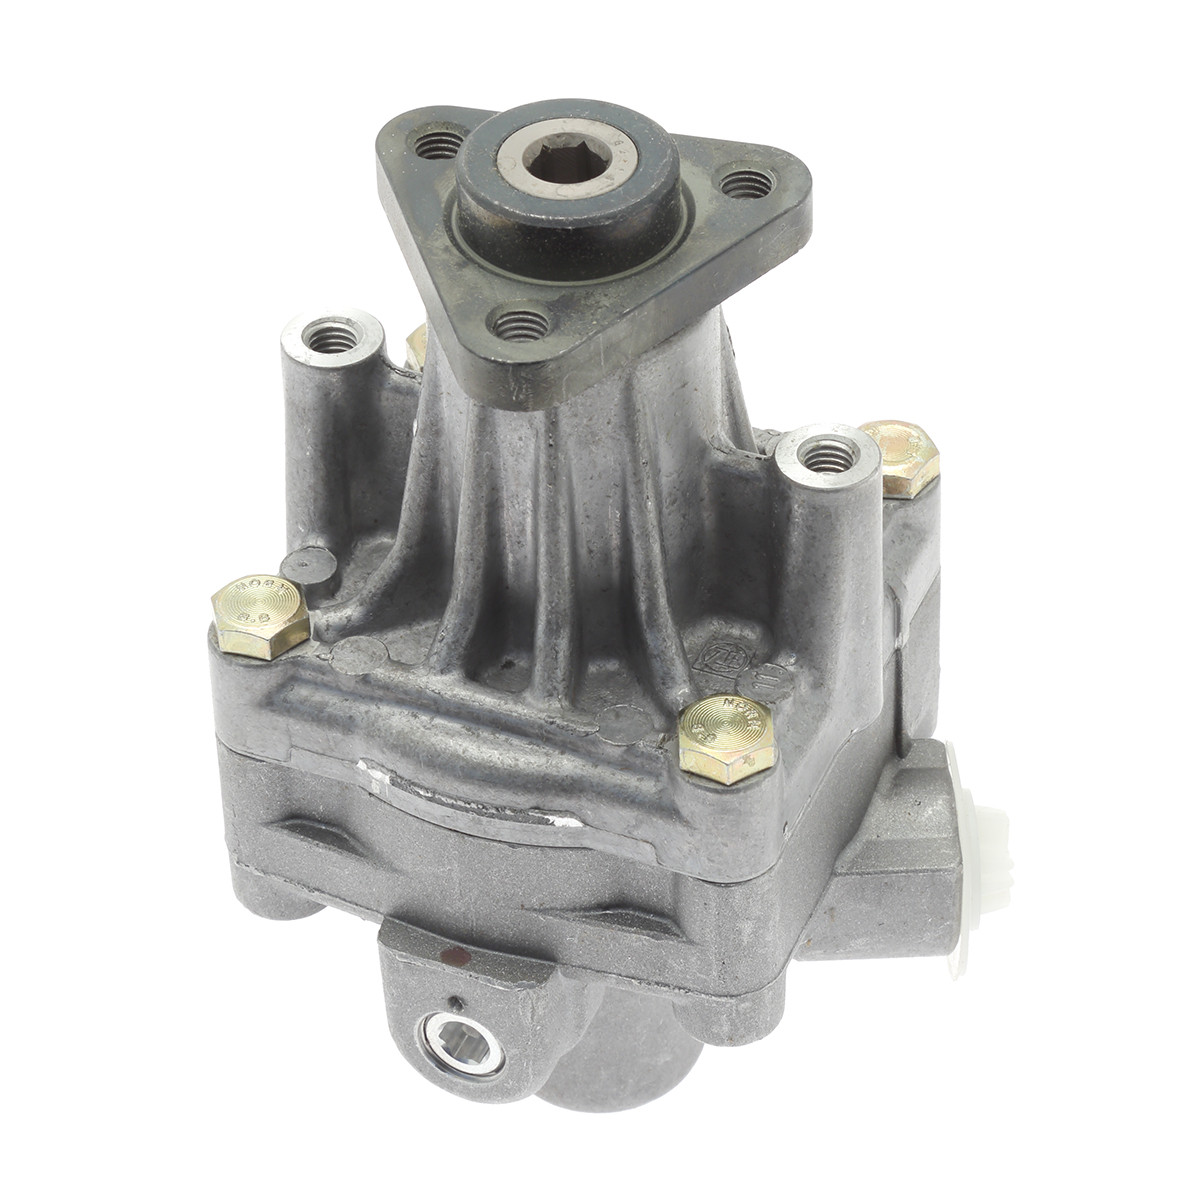 Power Steering Pump Fit For Audi A6 S6 RS6 S8 A8 Quattro A6 Quattro 1997-2004